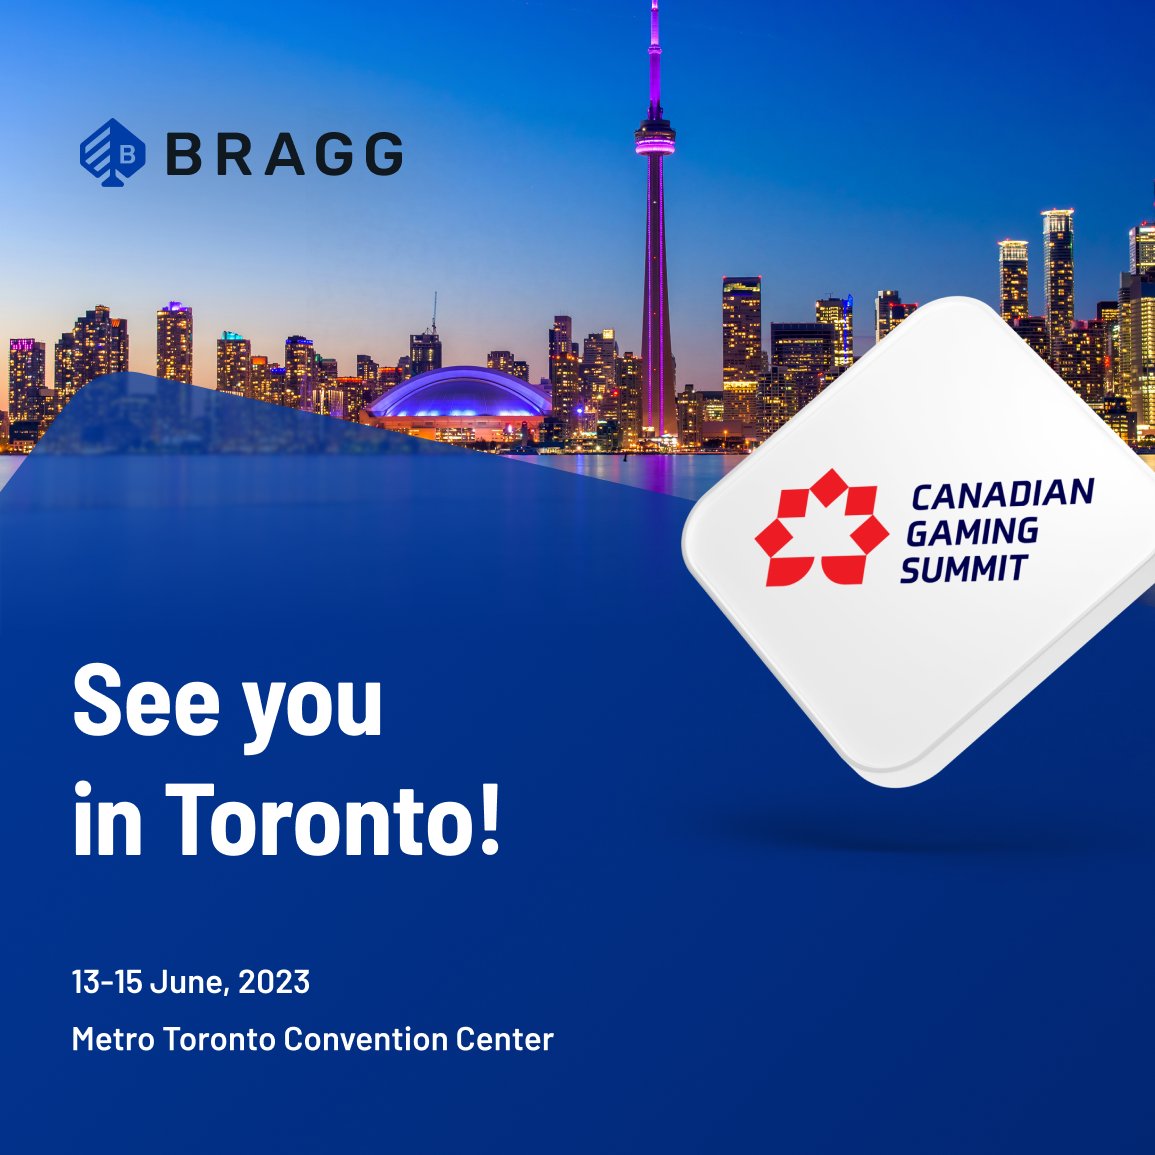 Attending the SBC Canadian Gaming Summit in Toronto, 13-15 June. &#127809;

Bragg CSO Yaniv Spielberg &amp; COO Kunal Mishra will be there to discuss our North America content roll-out and impressive regional expansion, contributing to our record Q1 results. $BRAG